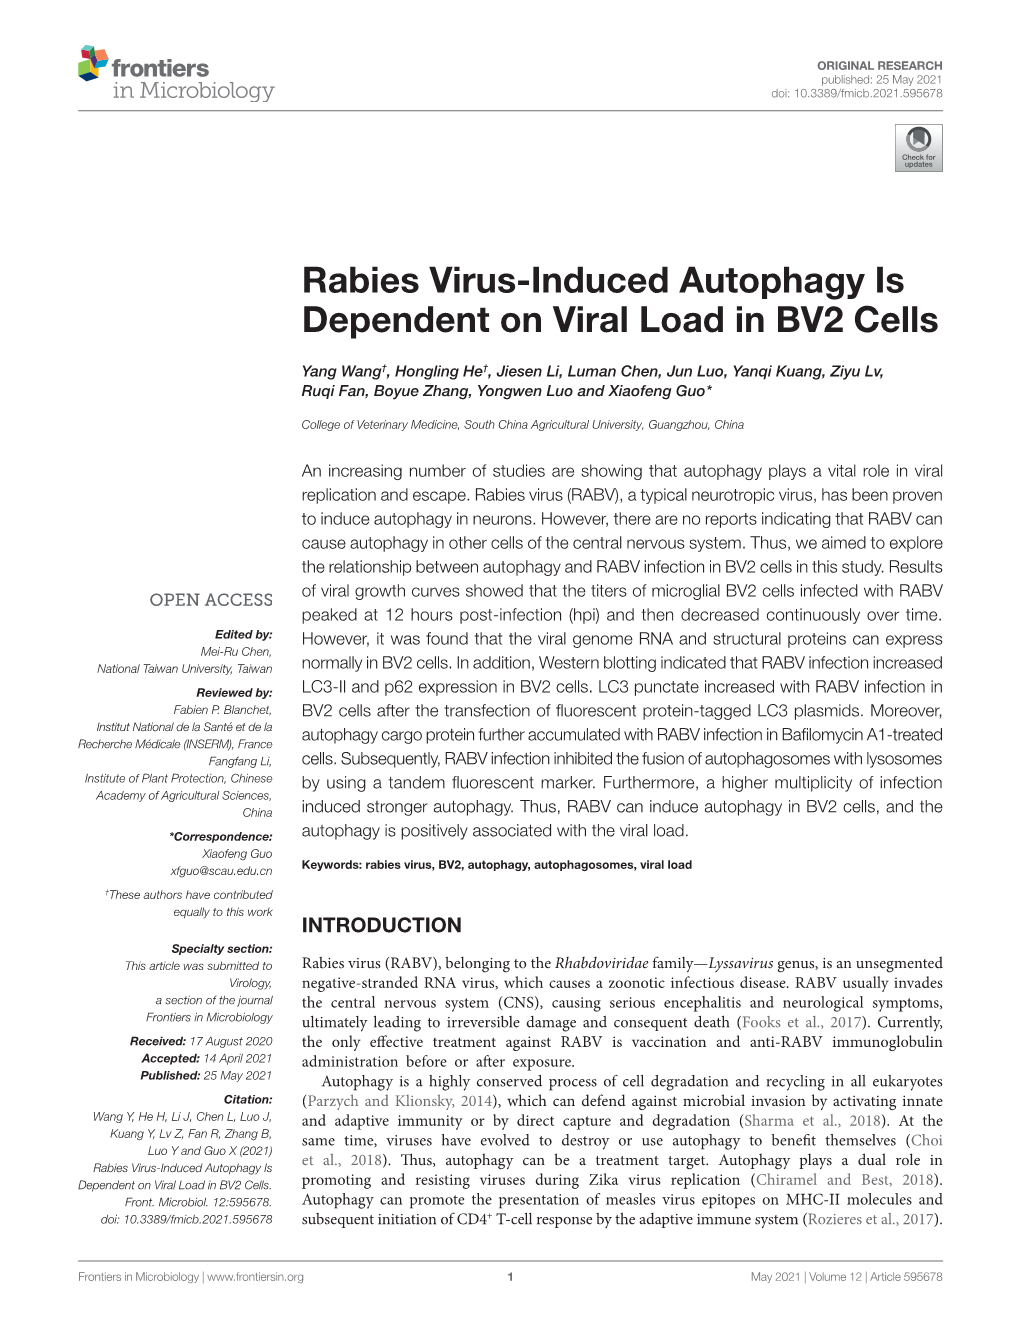 Rabies Virus-Induced Autophagy Is Dependent on Viral Load in BV2 Cells